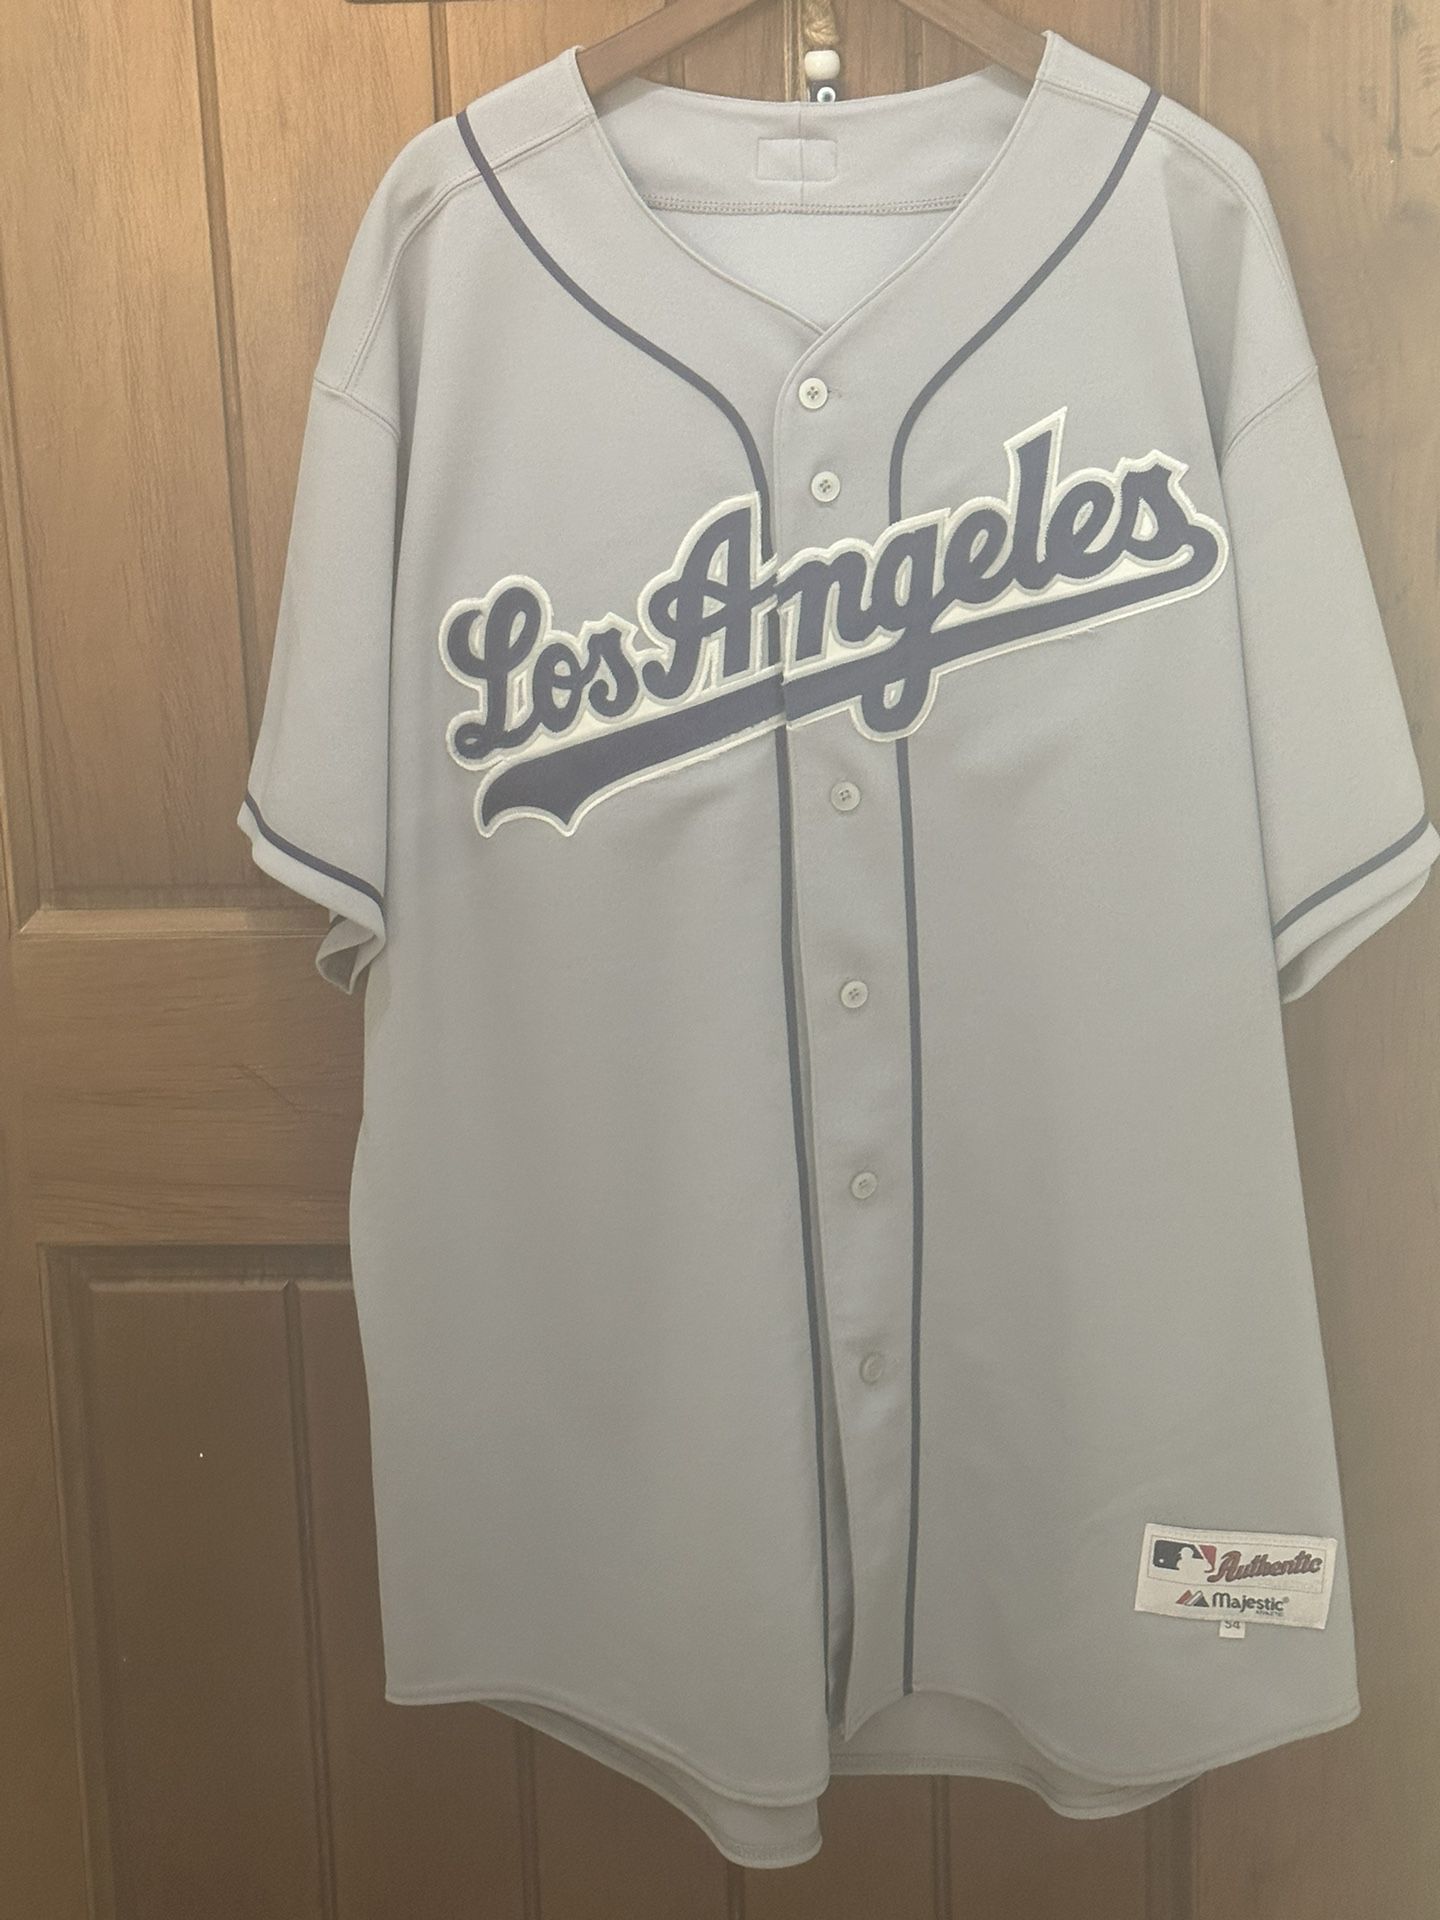 DODGERS/KINGS JERSEY “giveaway Jersey” $30 FIRM 2 Available SIZE adult XL  for Sale in Irwindale, CA - OfferUp